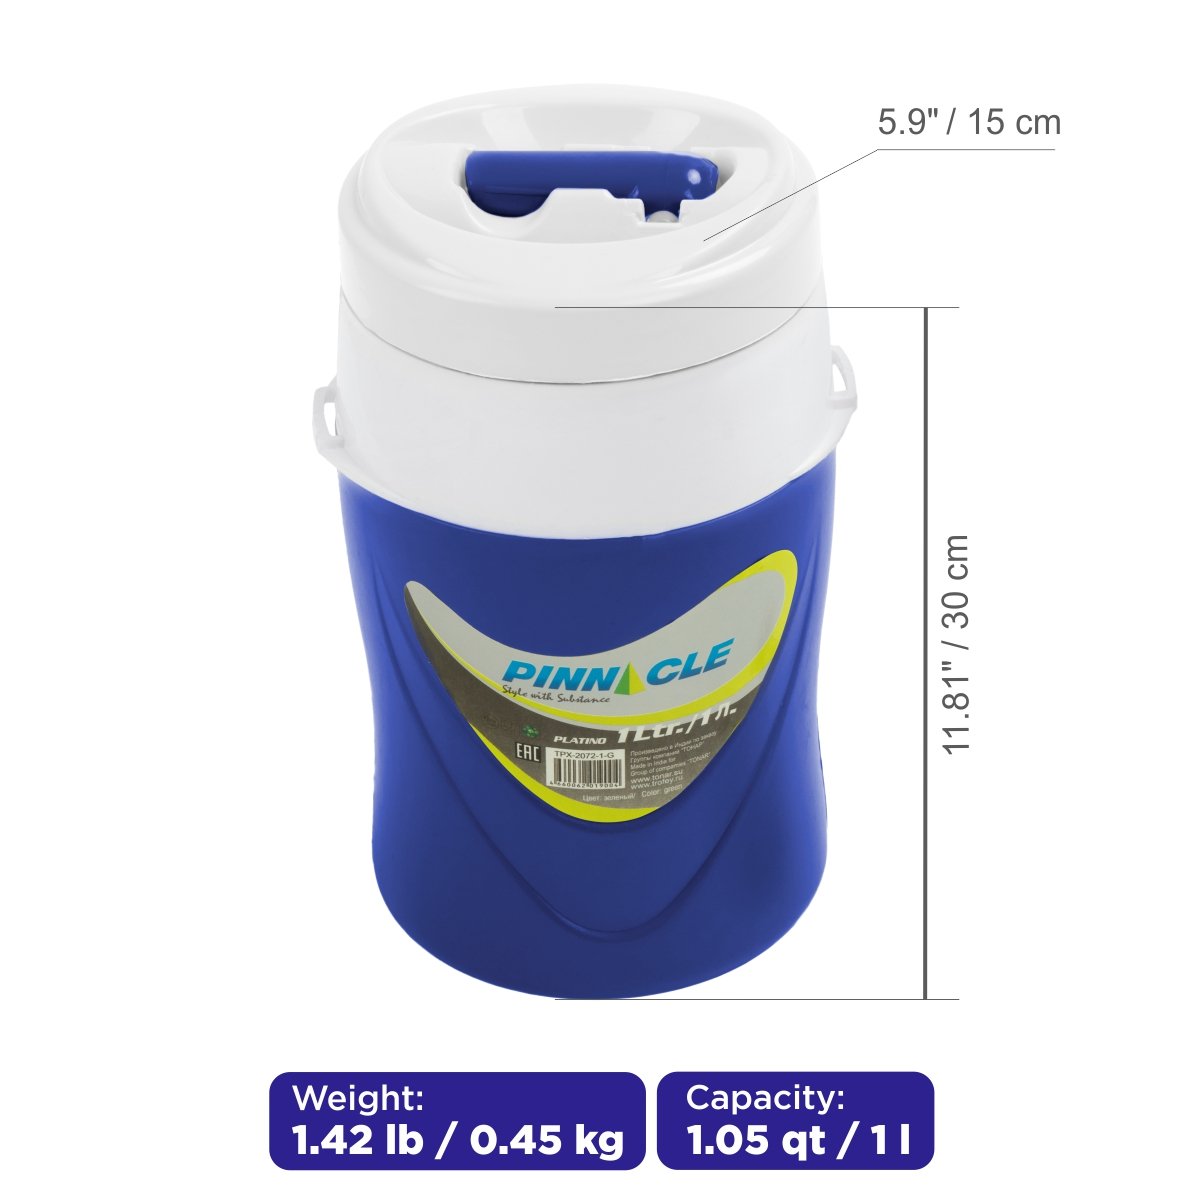 Platino Portable Beverage Cooler Jug for Outdoors and School, 1 qt weighs 1 lb and is 11.8 inches high and 6 inches wide.